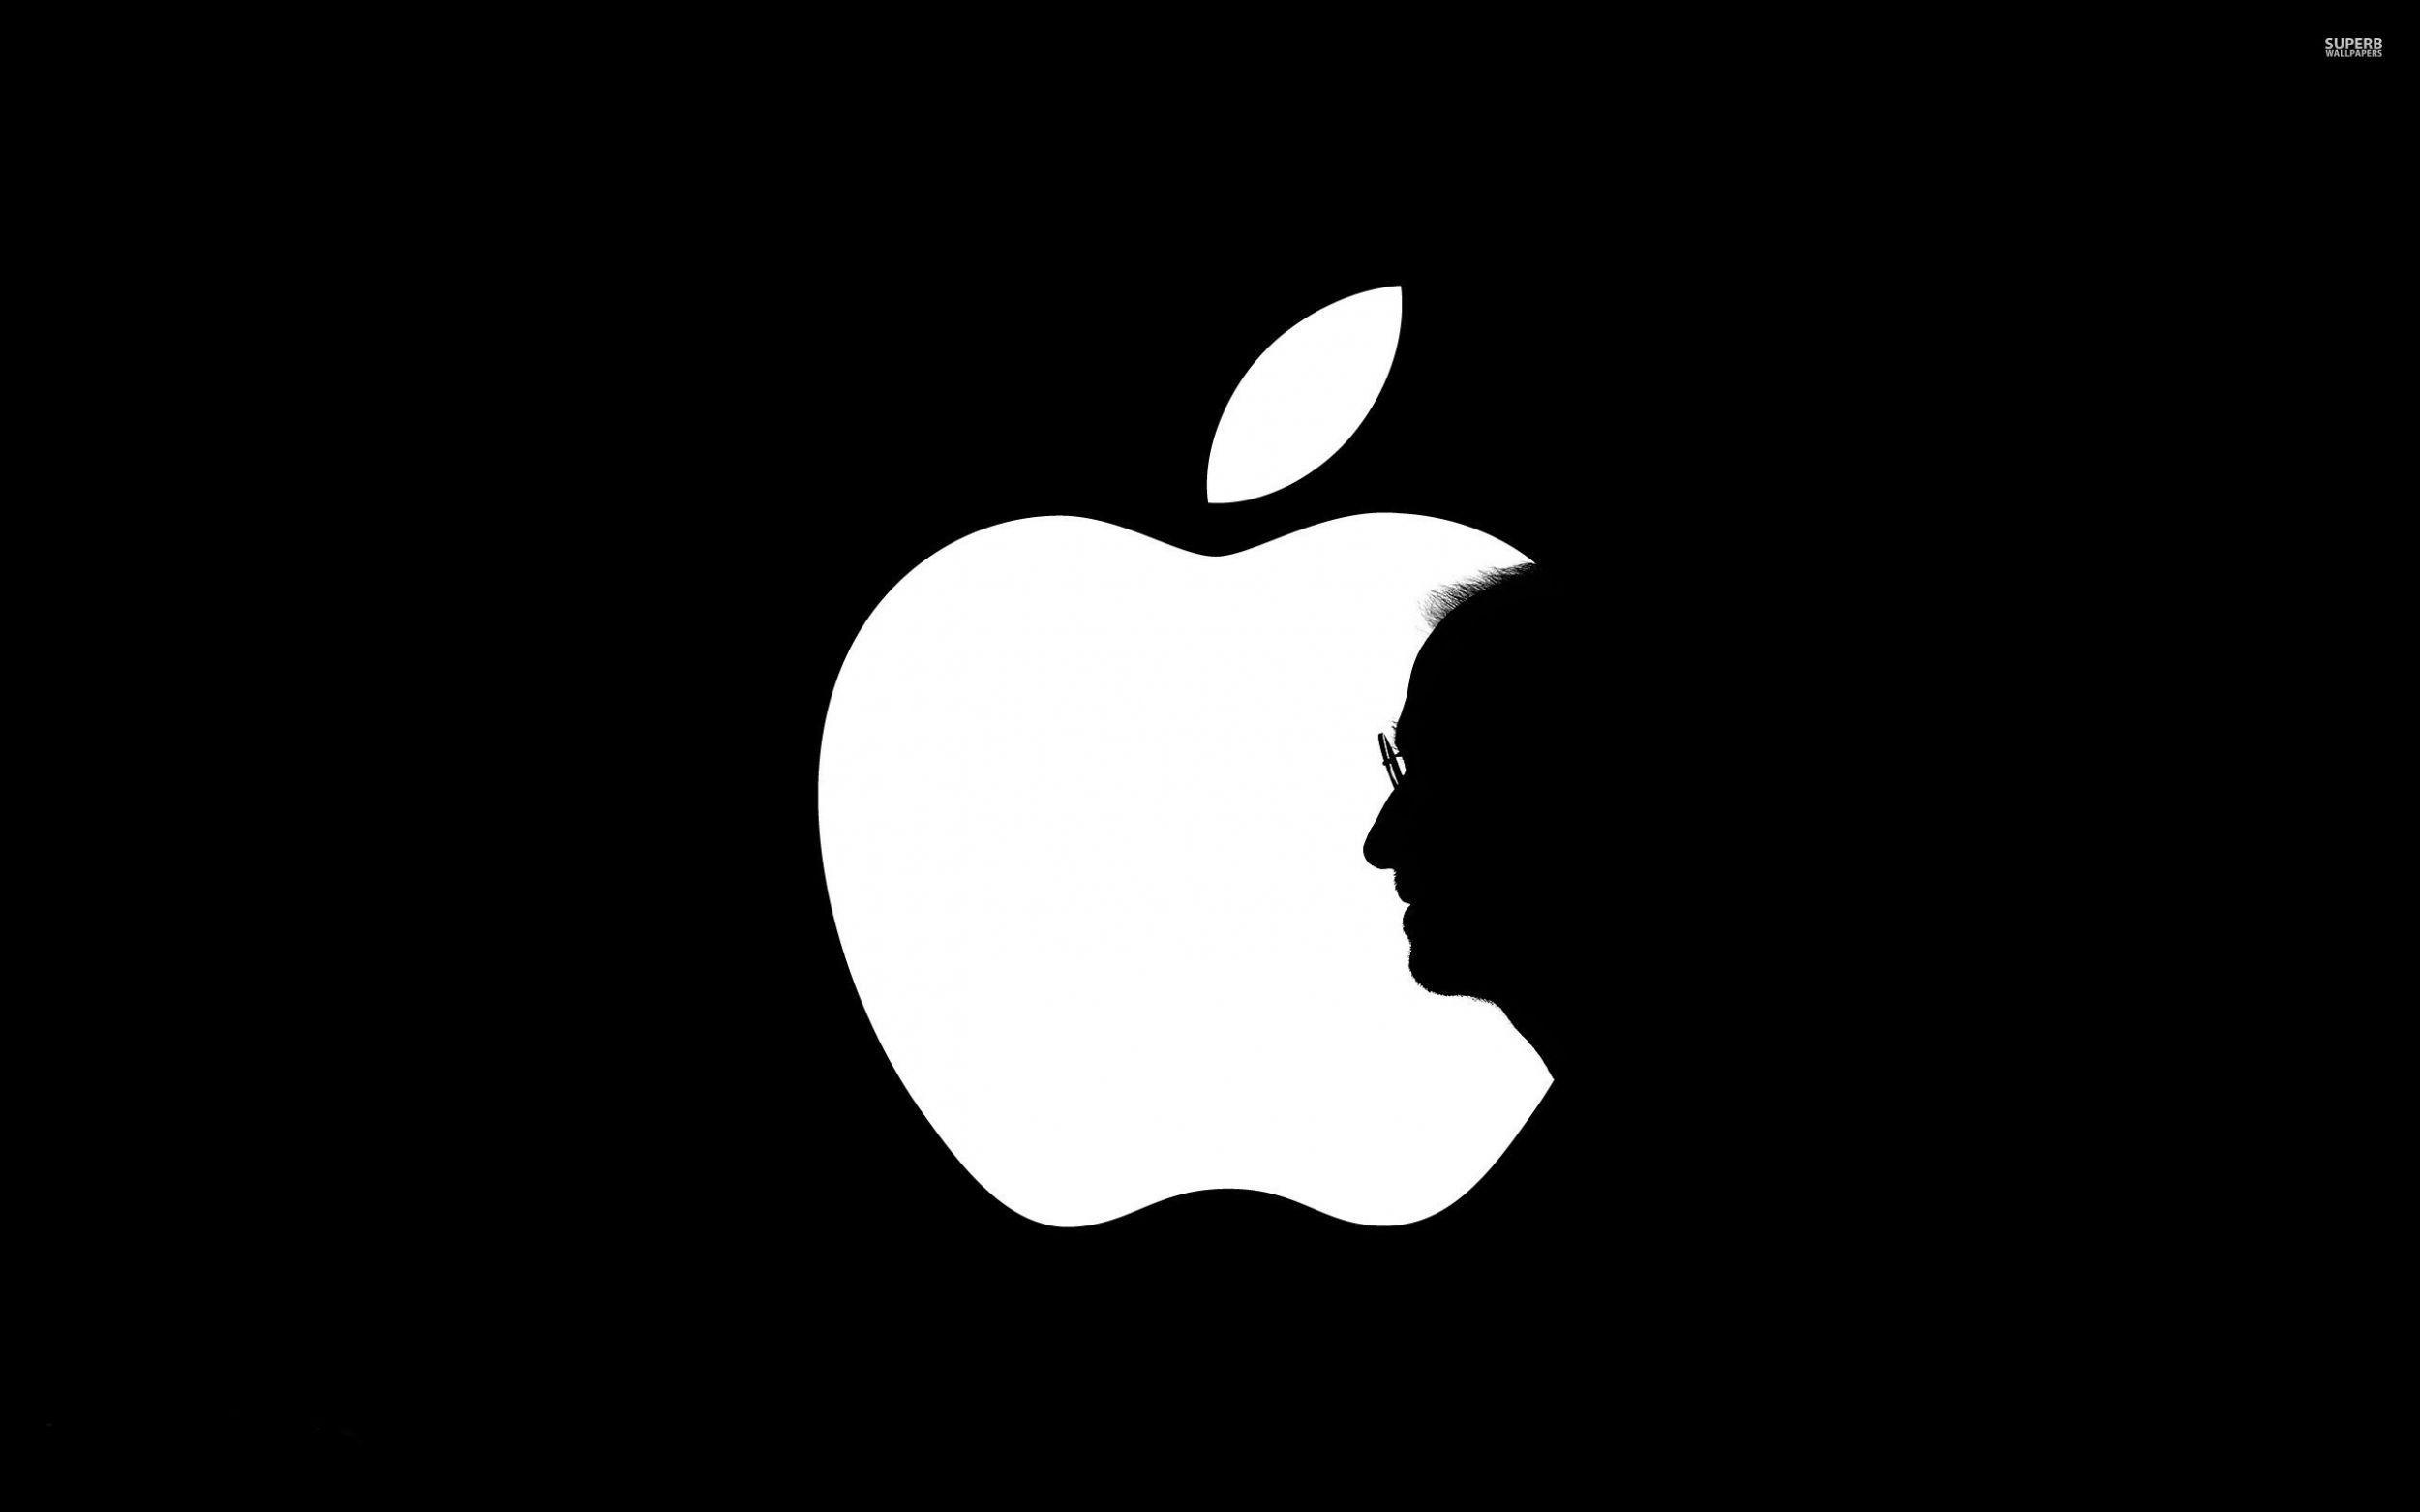 Apple Wallpaper, HDQ Cover Picture for PC & Mac, Tablet, Laptop